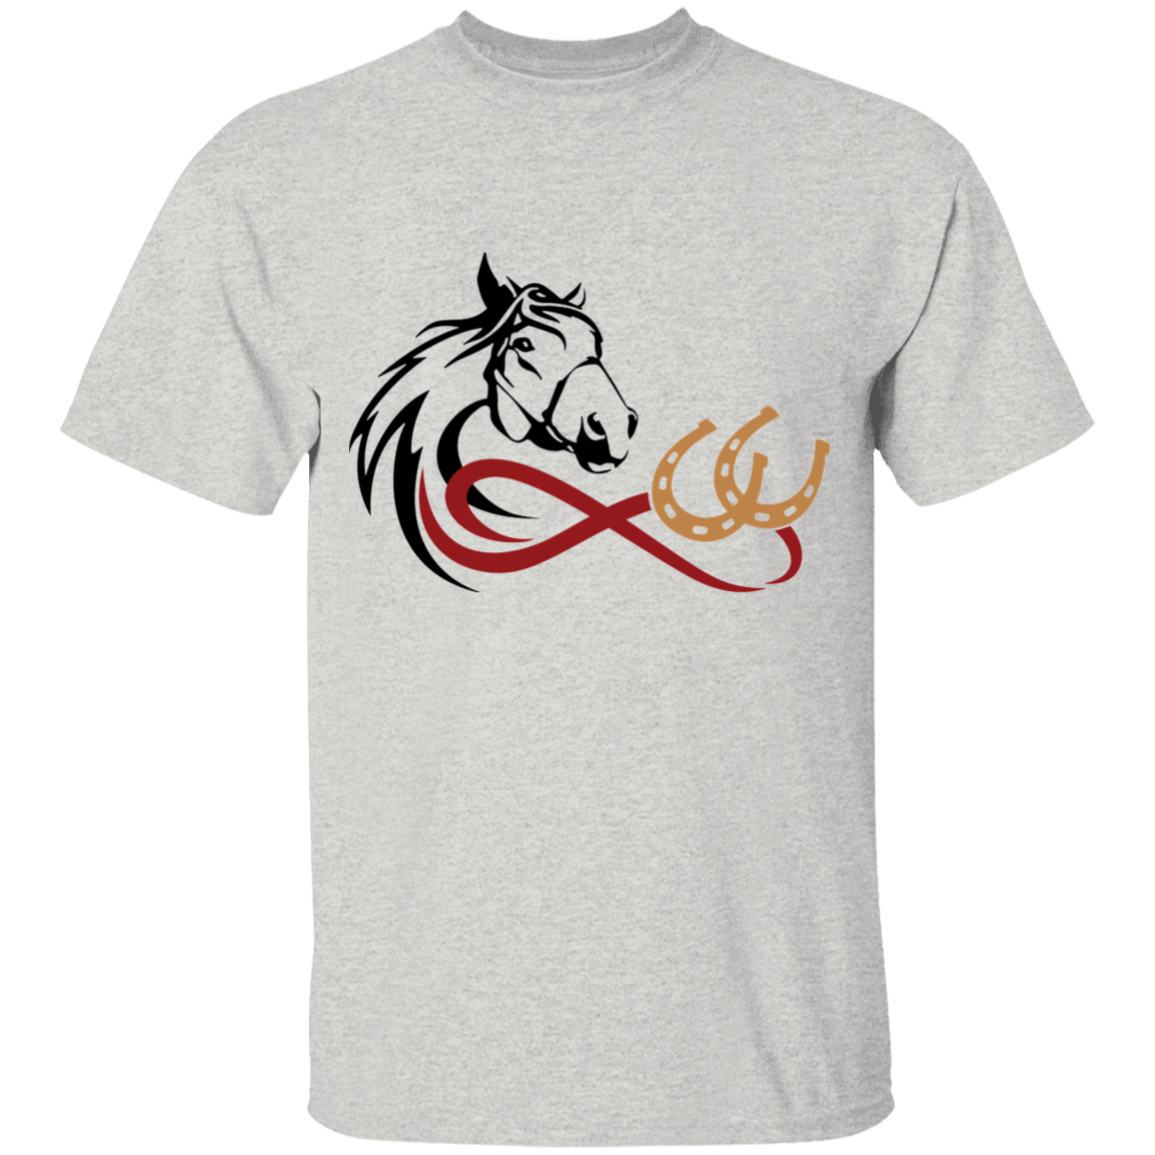 Youth horse Infinity t-shirt